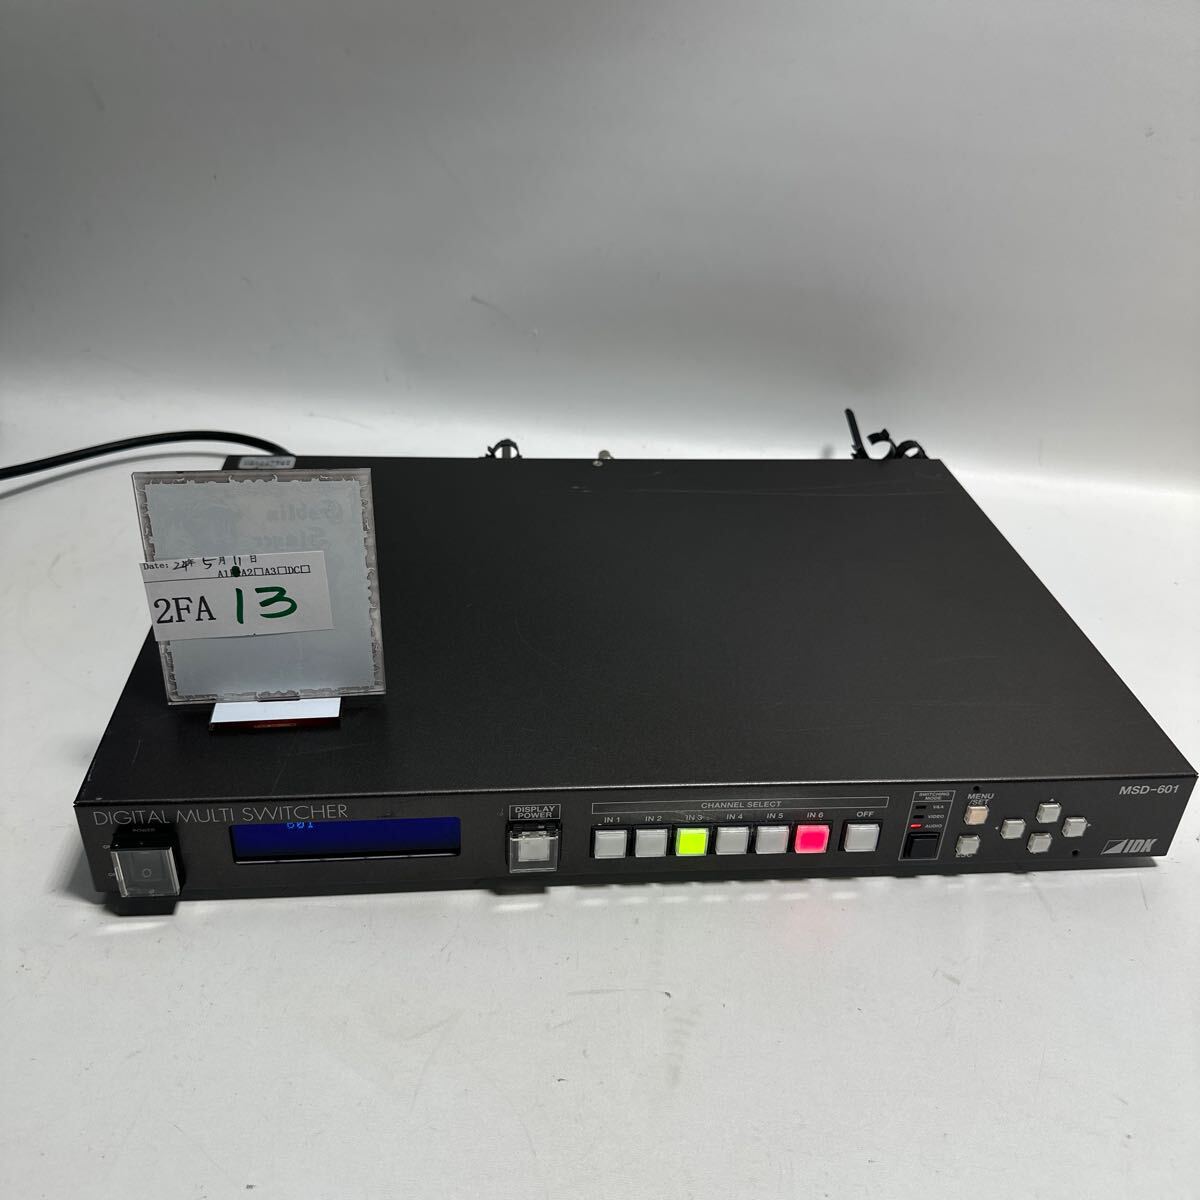 [2FA13]IDK digital multi switch .MSD-601 used present condition exhibition operation goods (240511)